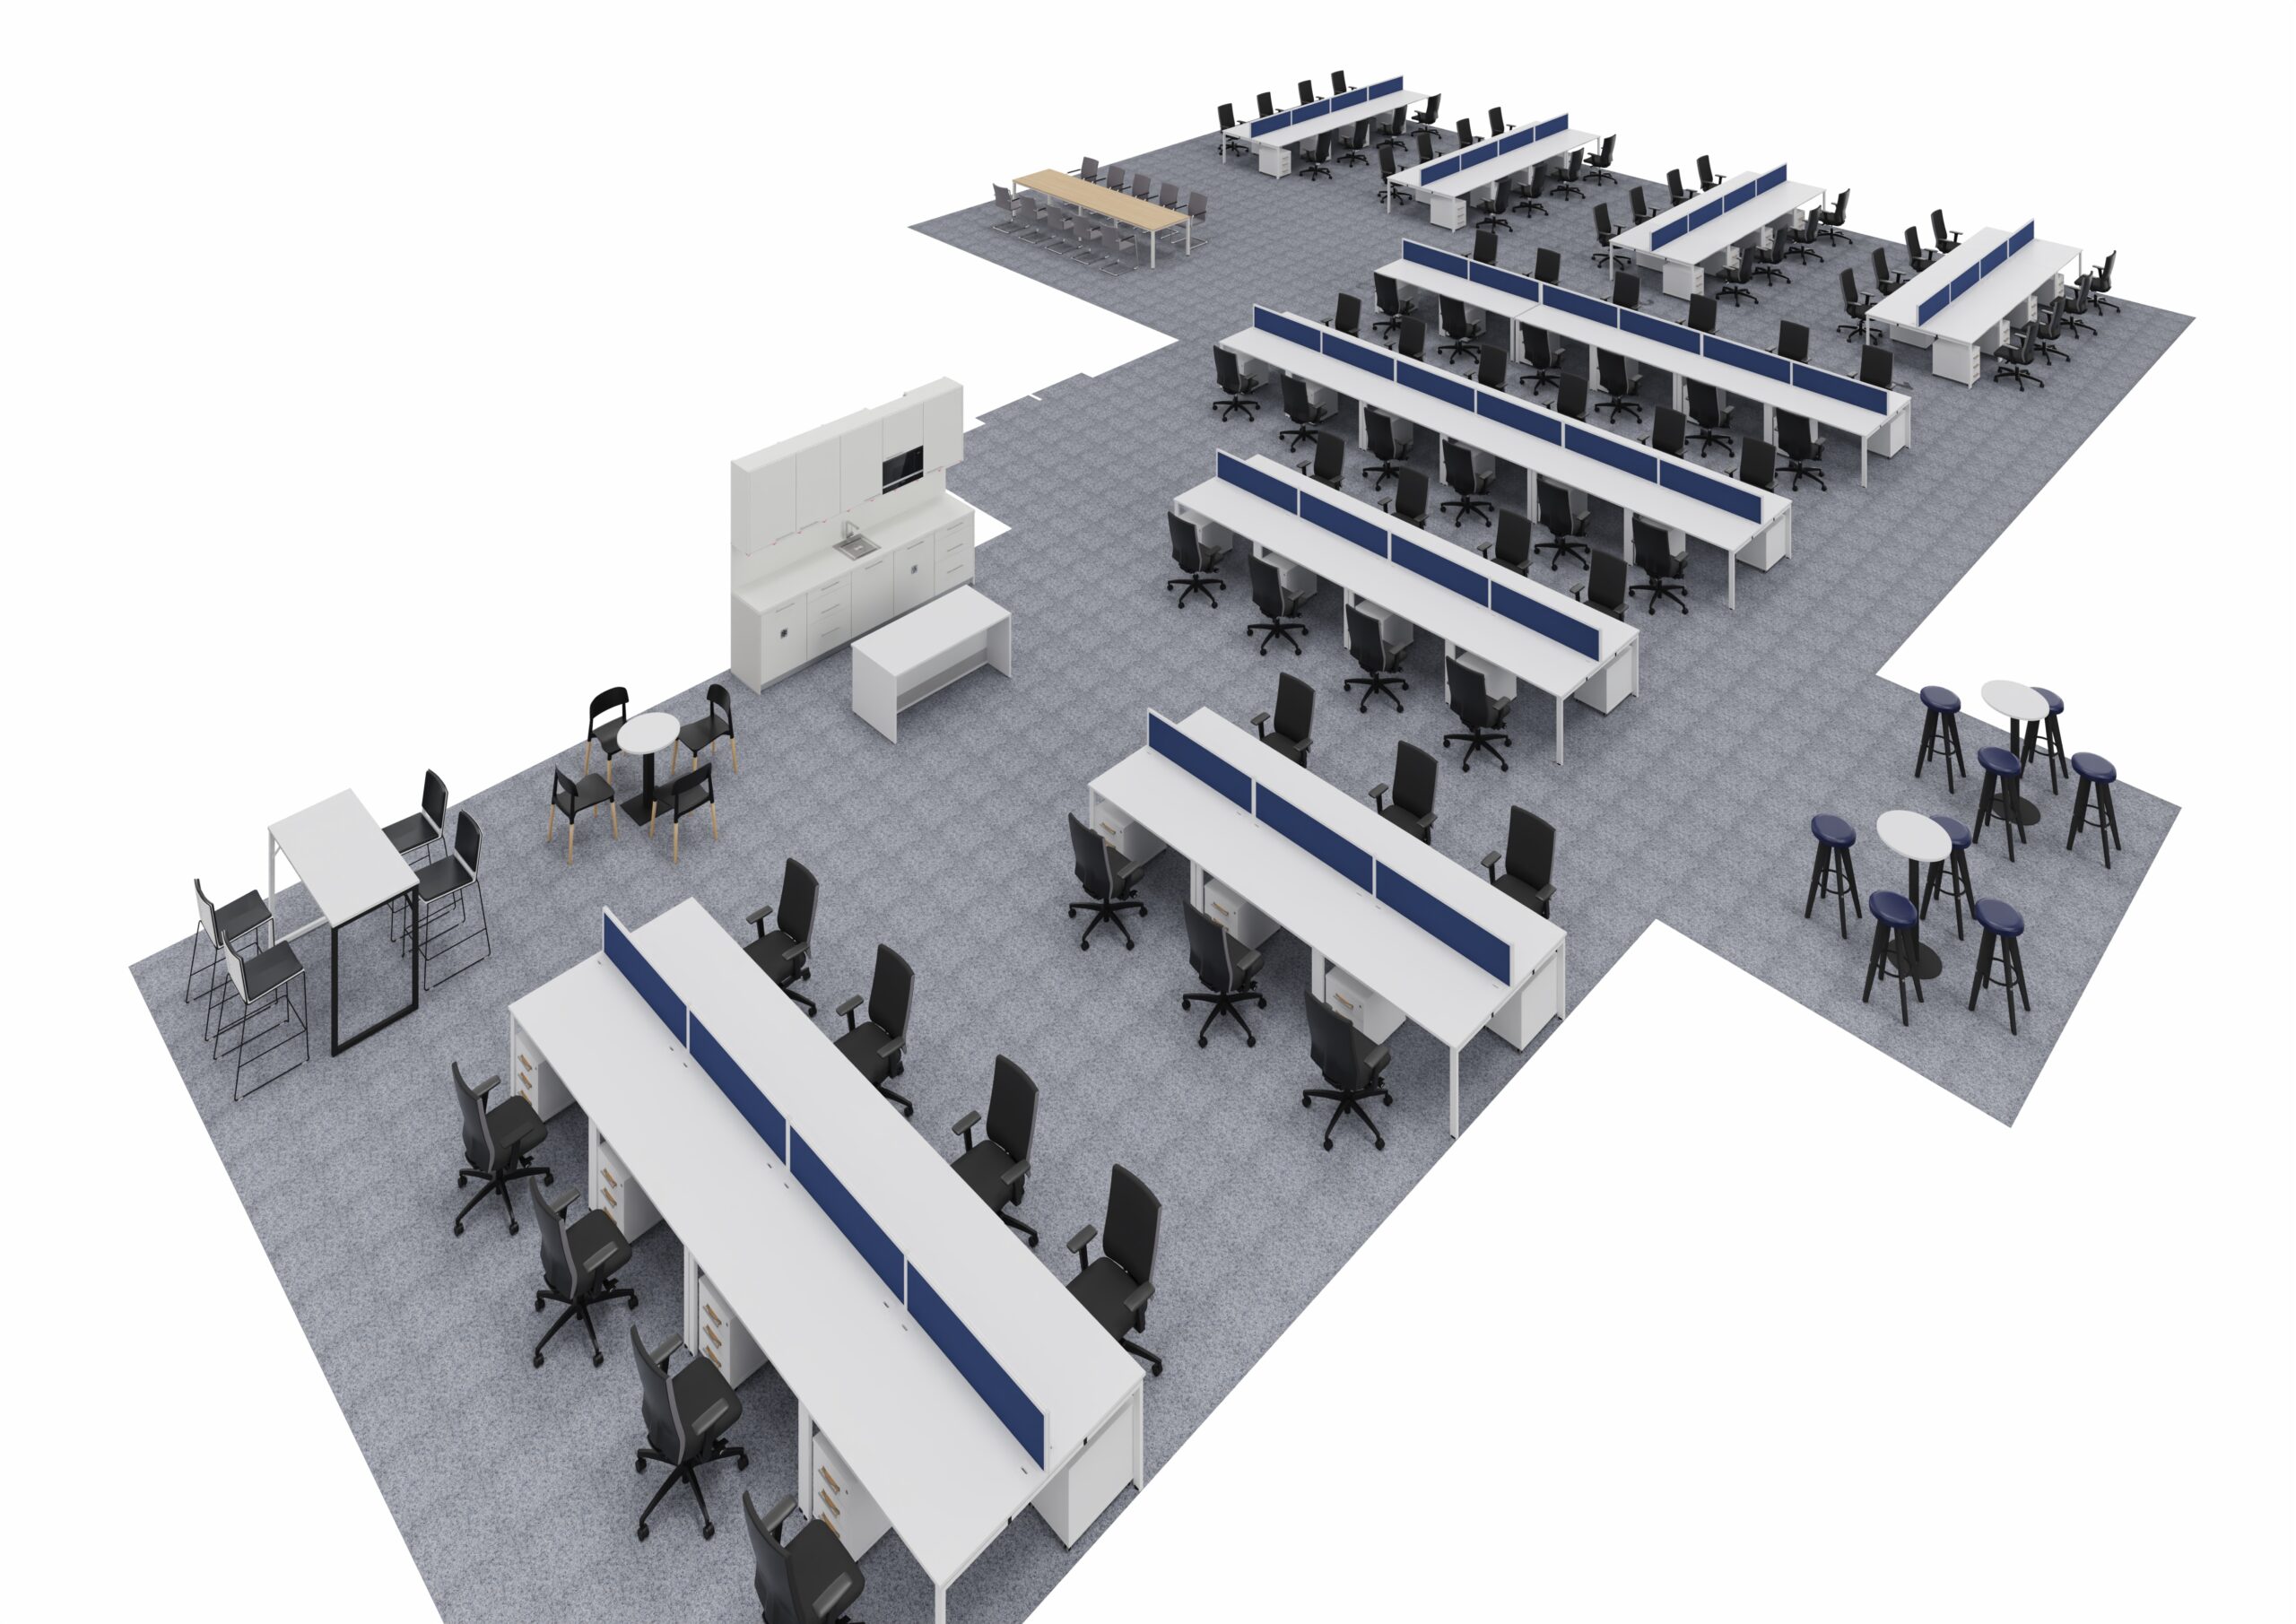 A 3D Ground Floor of a House with benchdesks and chairs